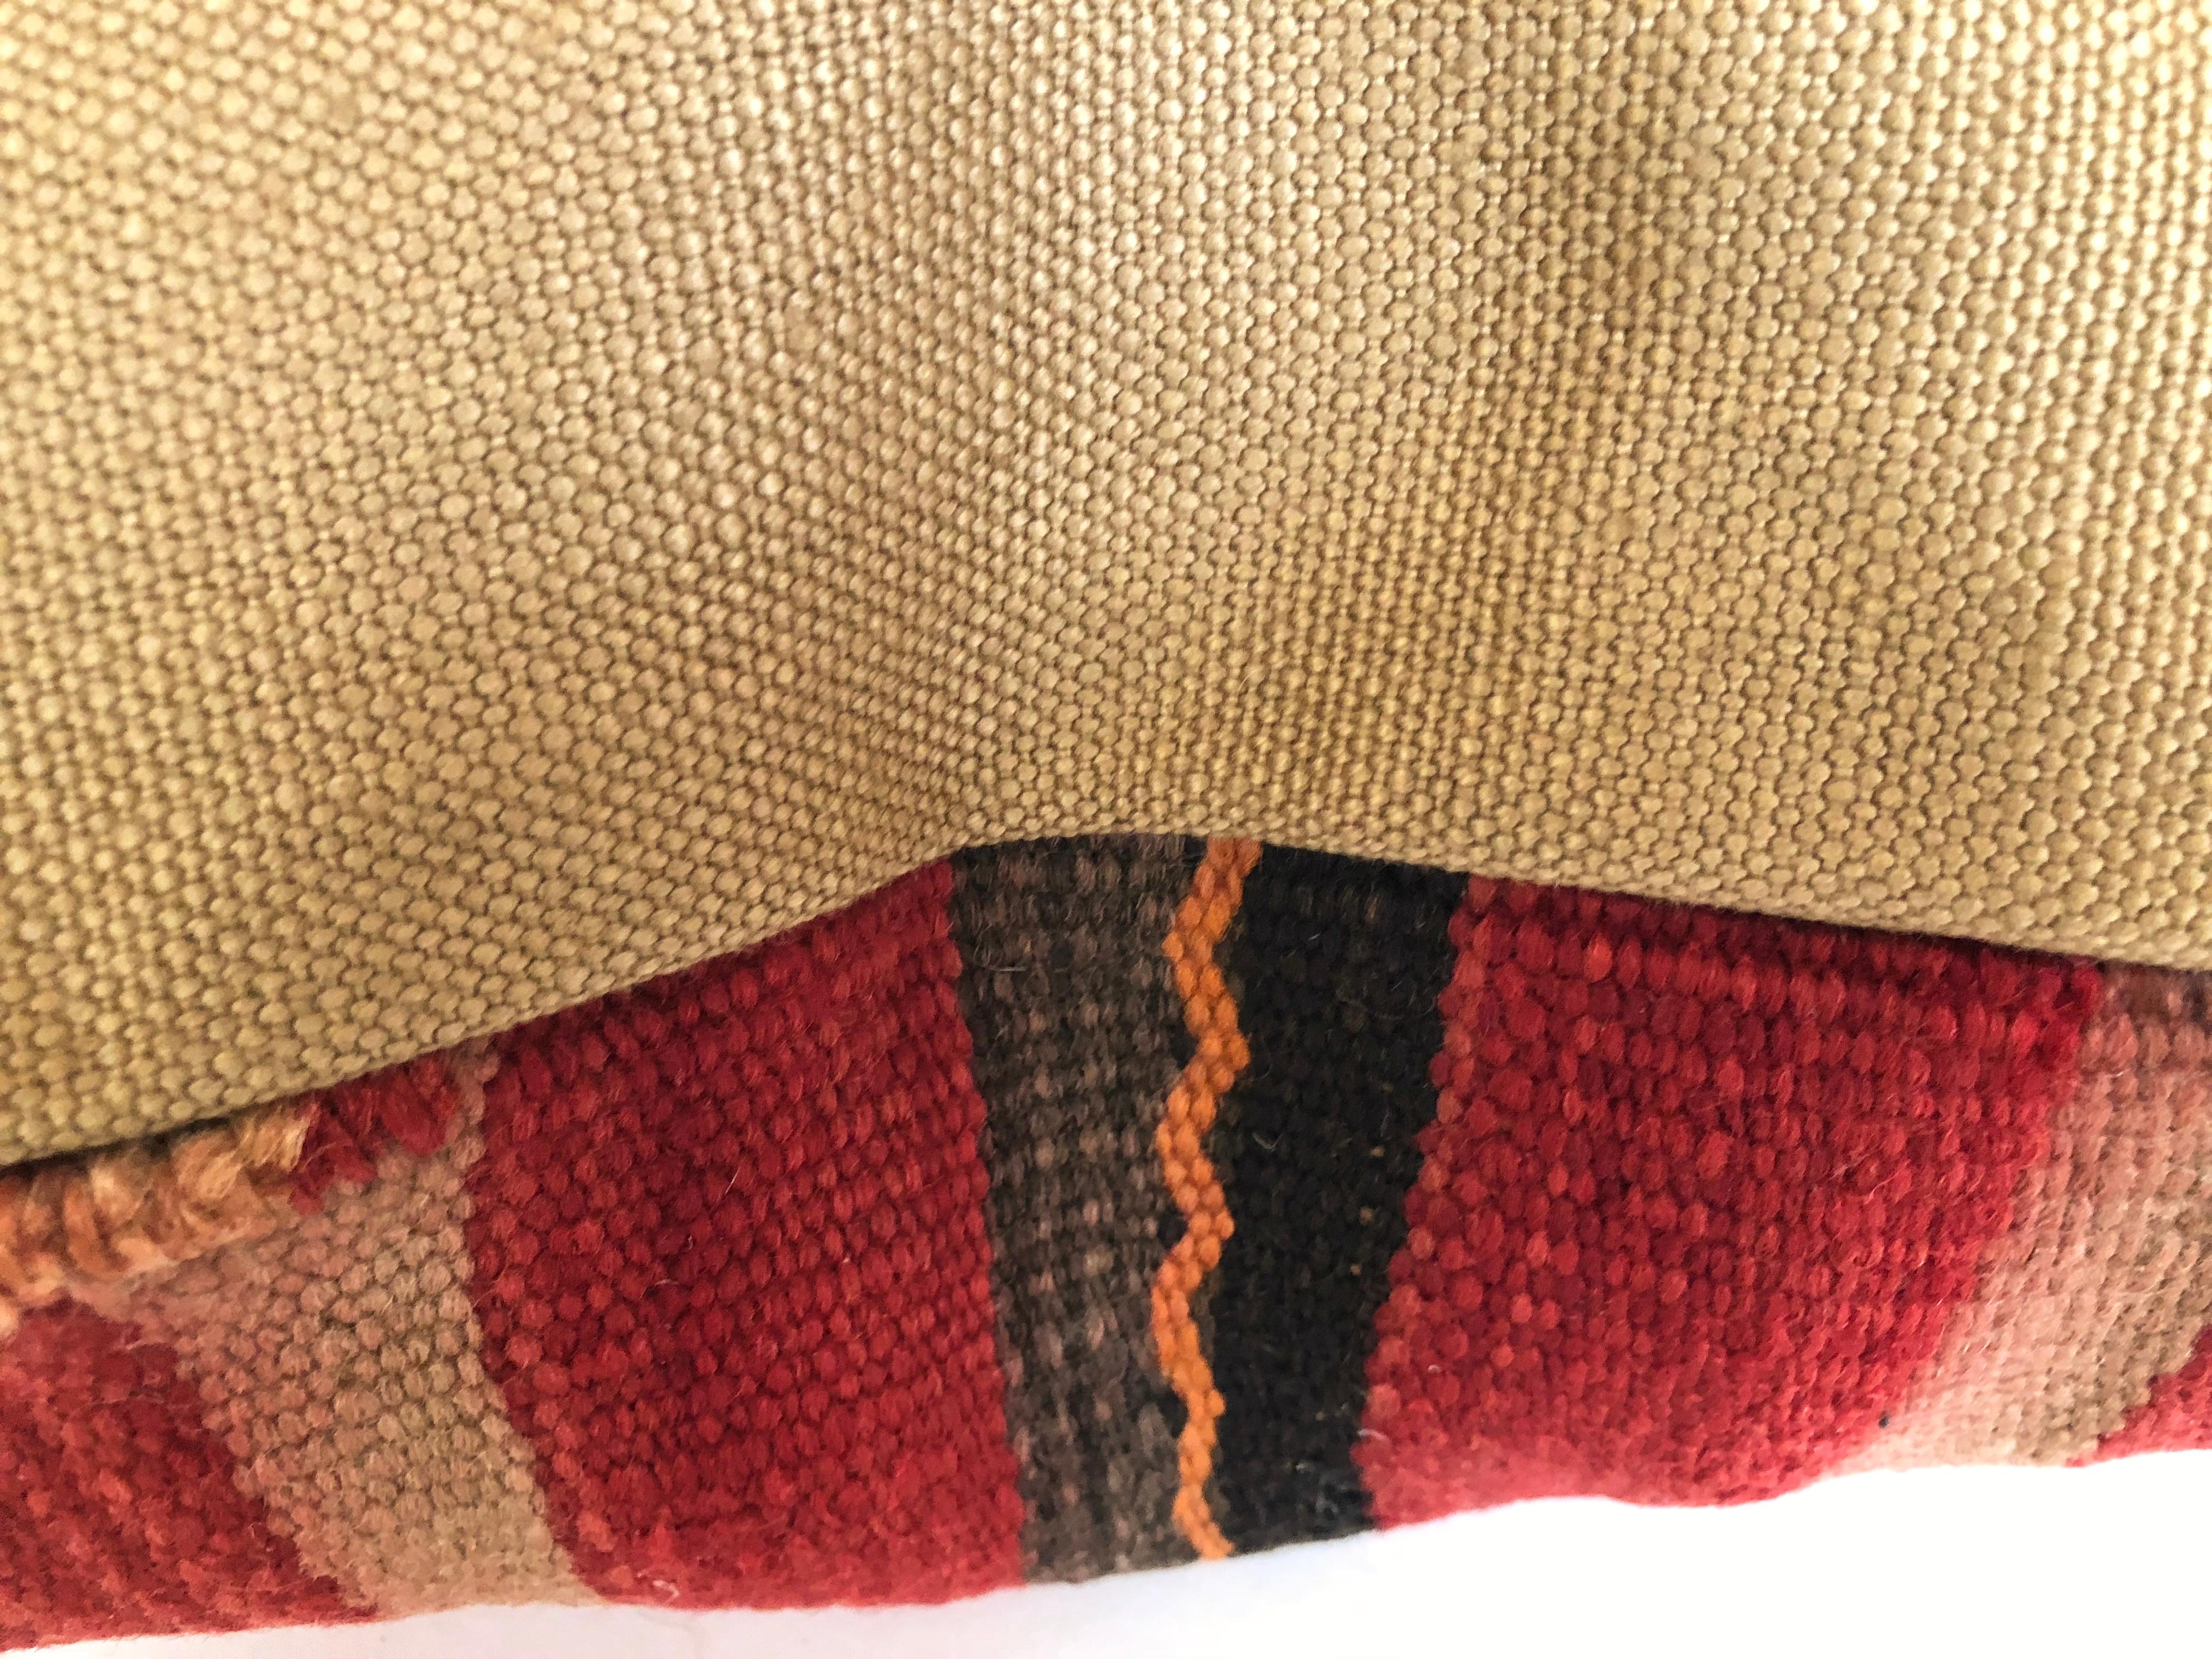 Custom pillow cut from a hand loomed wool Moroccan Berber rug from the Atlas Mountains. Wool is soft and lustrous with multicolored stripes and tufted tribal designs.
Pillow is backed in linen, filled with an insert of 50/50 down and feathers and